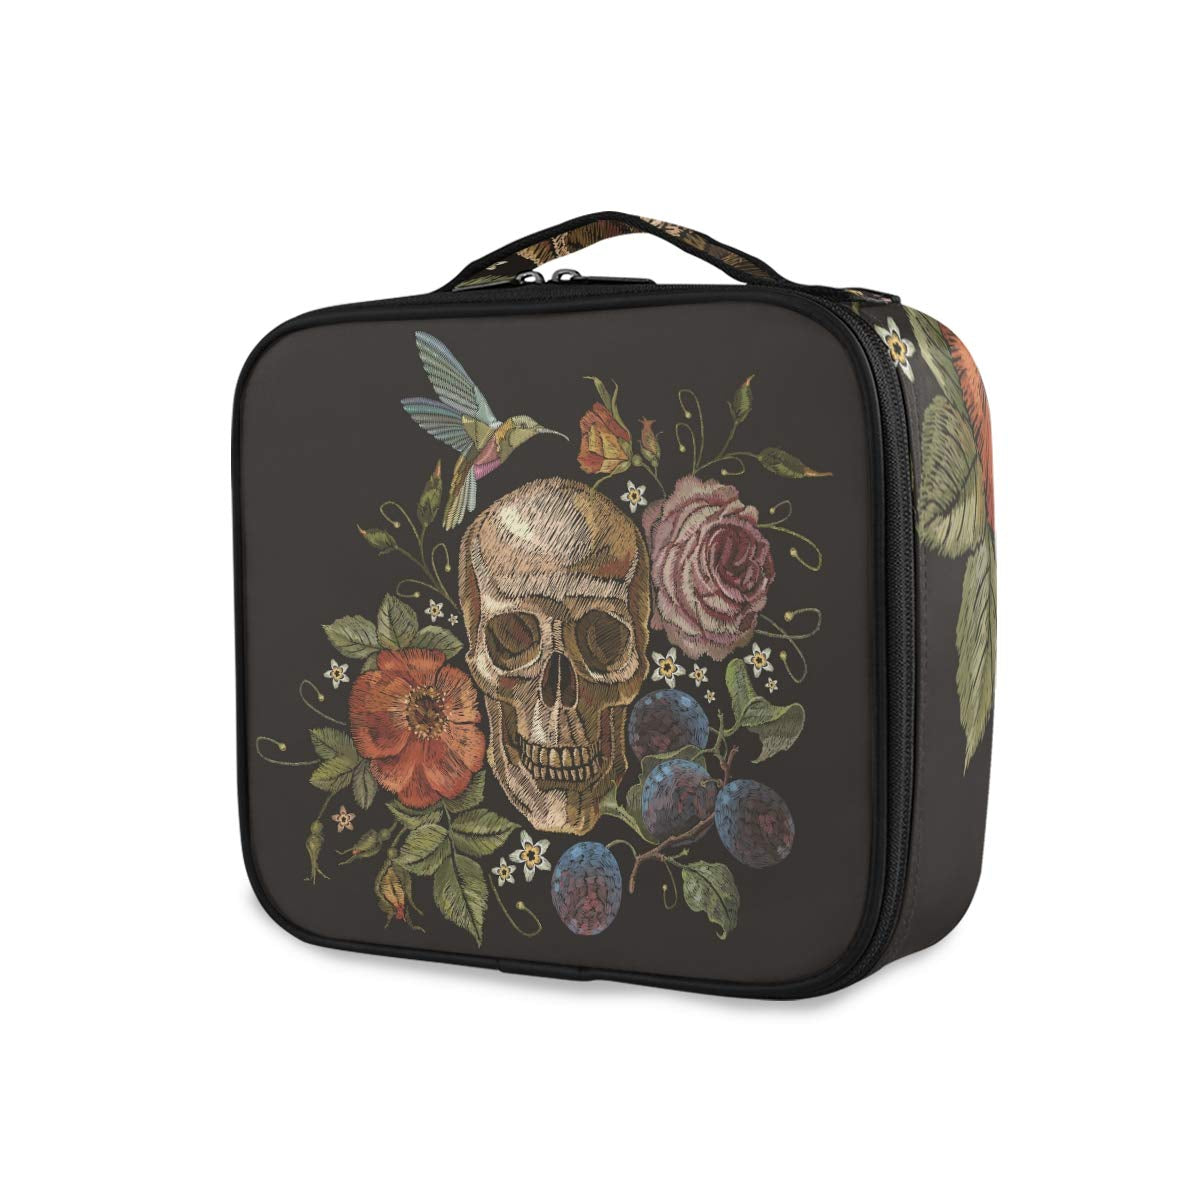 ALAZA Day of the Dead Colorful Sugar Skull with Floral Travel Makeup Train Case Jewelry Travel Organizer for Boys Girls